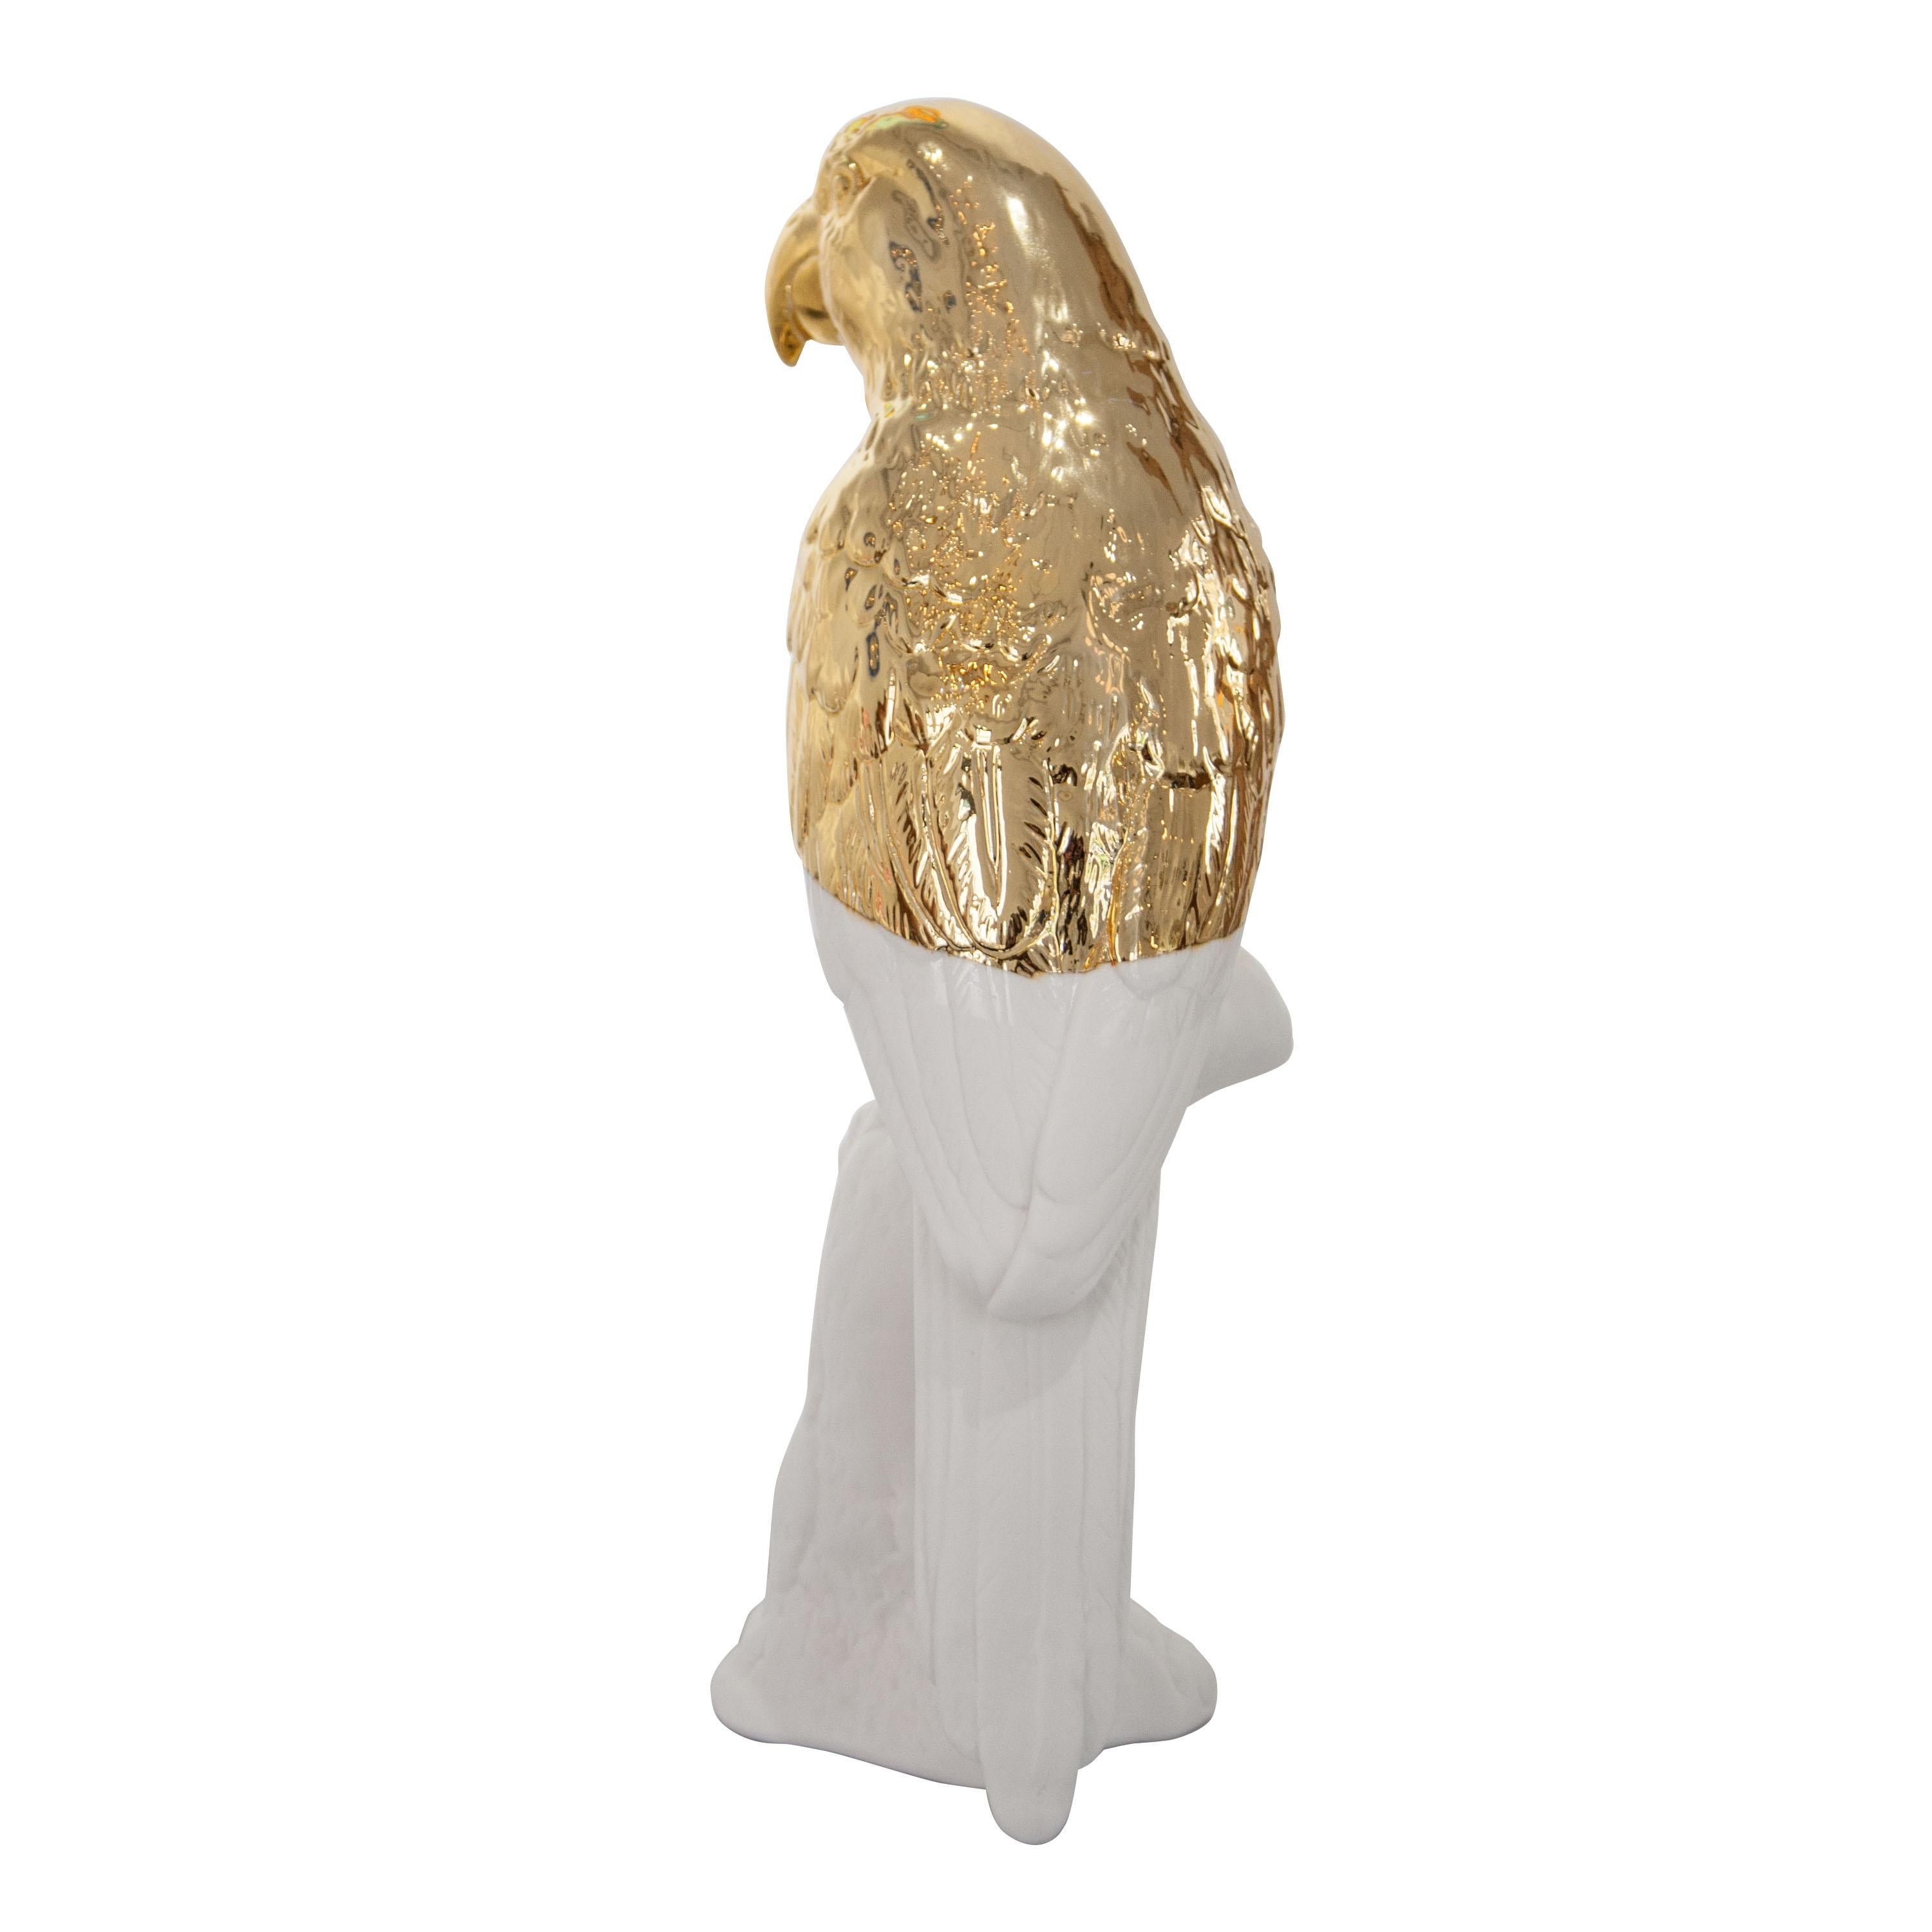 Modern Contemporary Ceramic Gold White Parrot Decoration Figure, Netherlands, 2020 For Sale